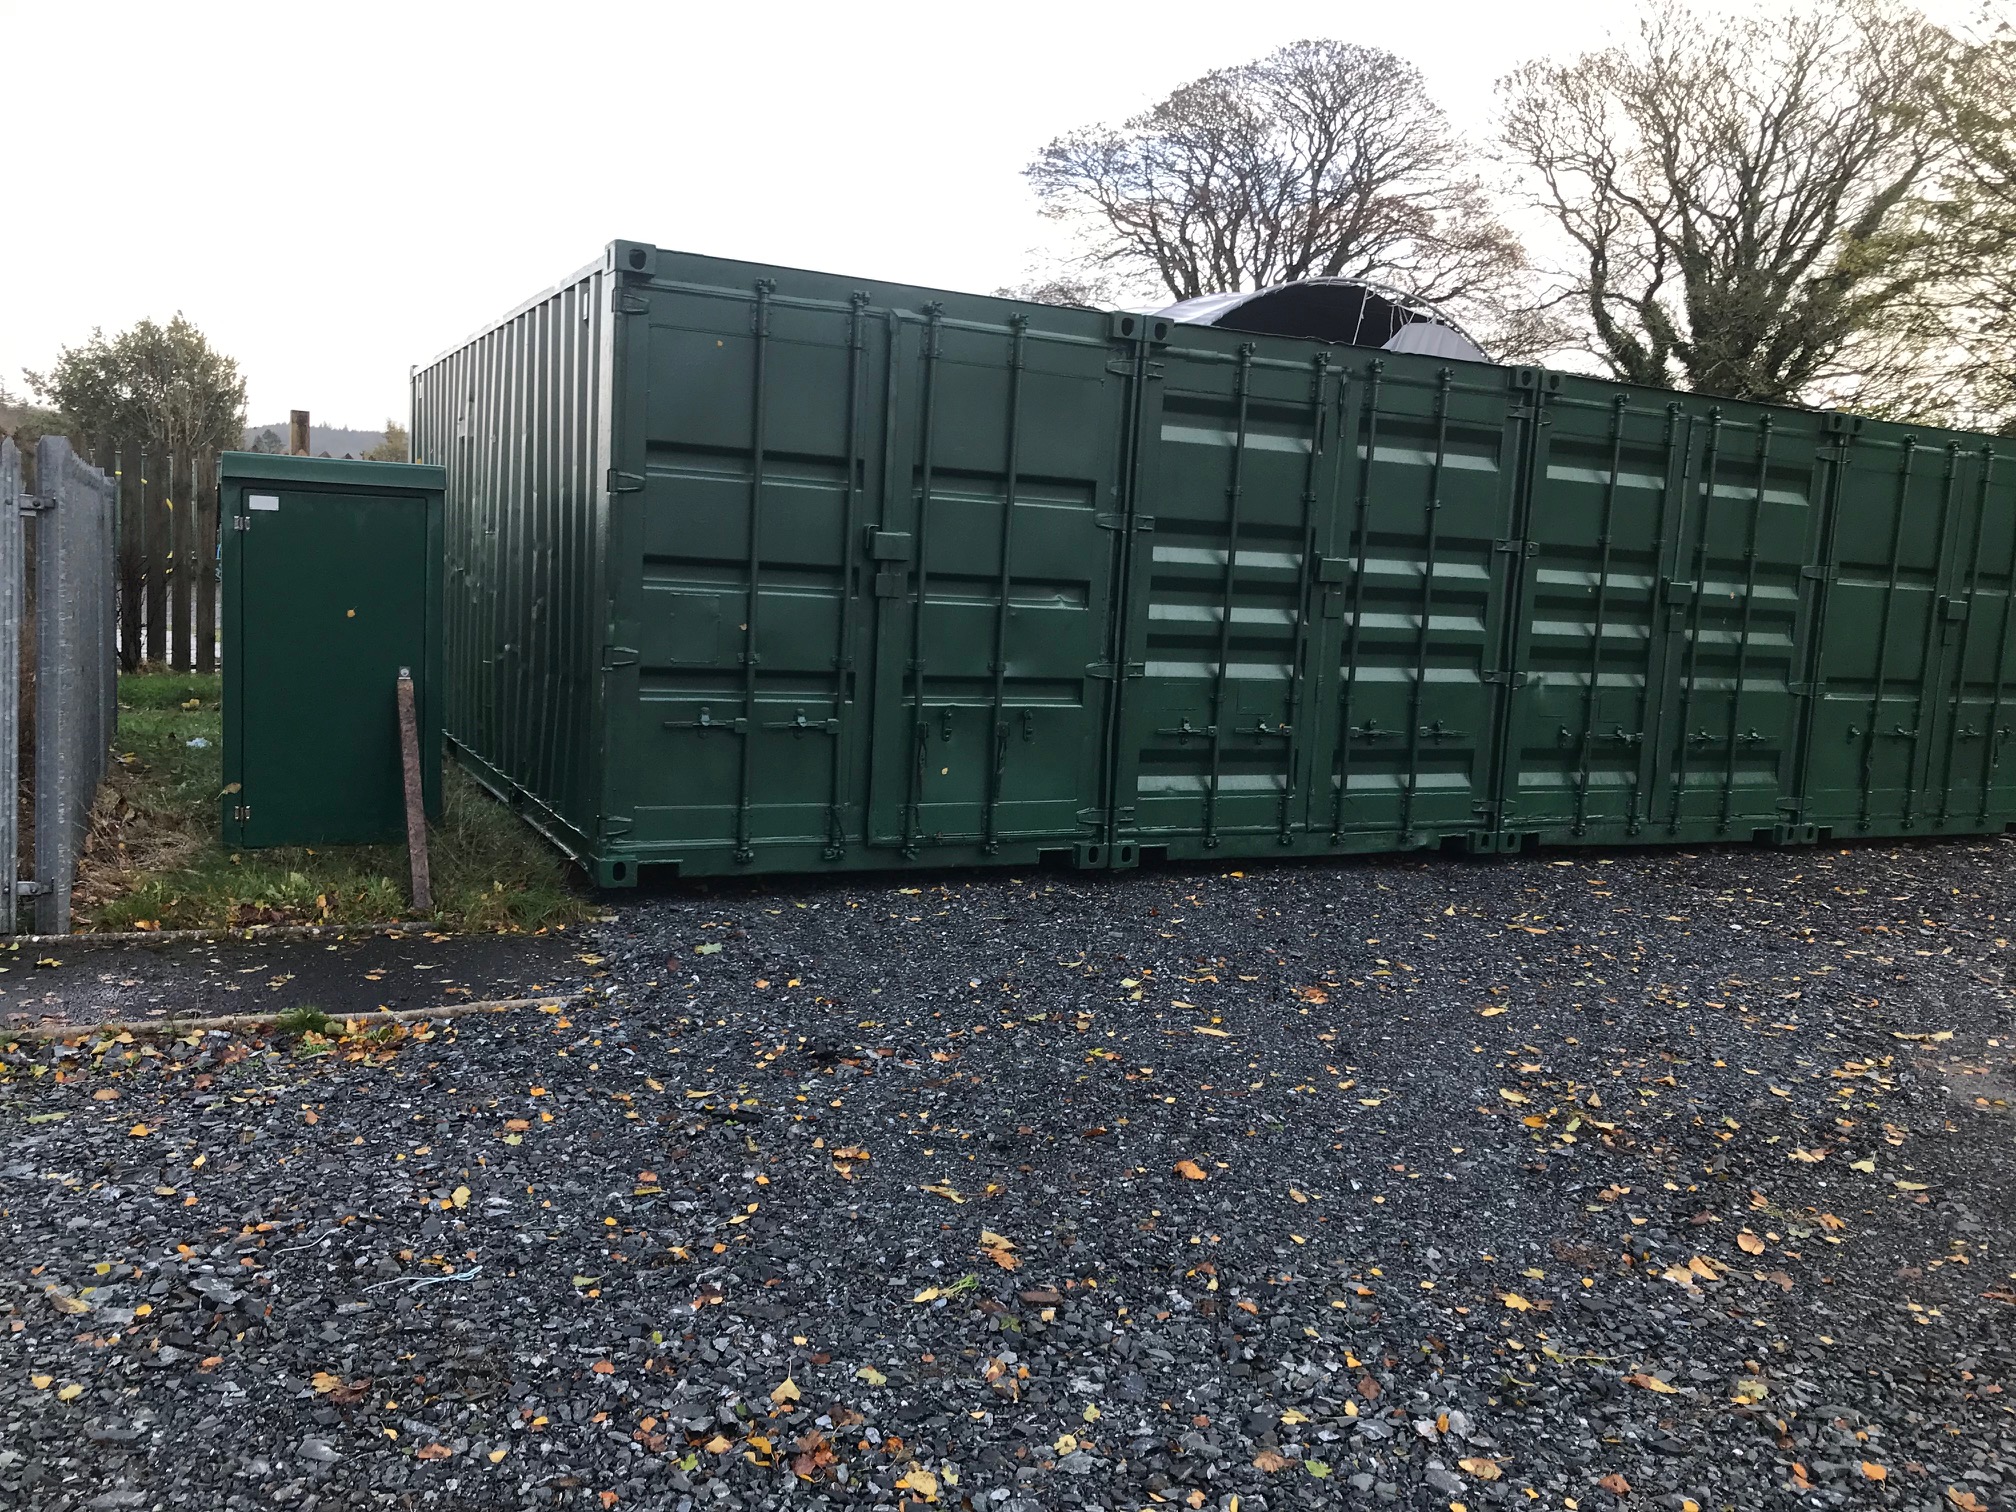 Photograph of Storage Containers, Newton Stewart